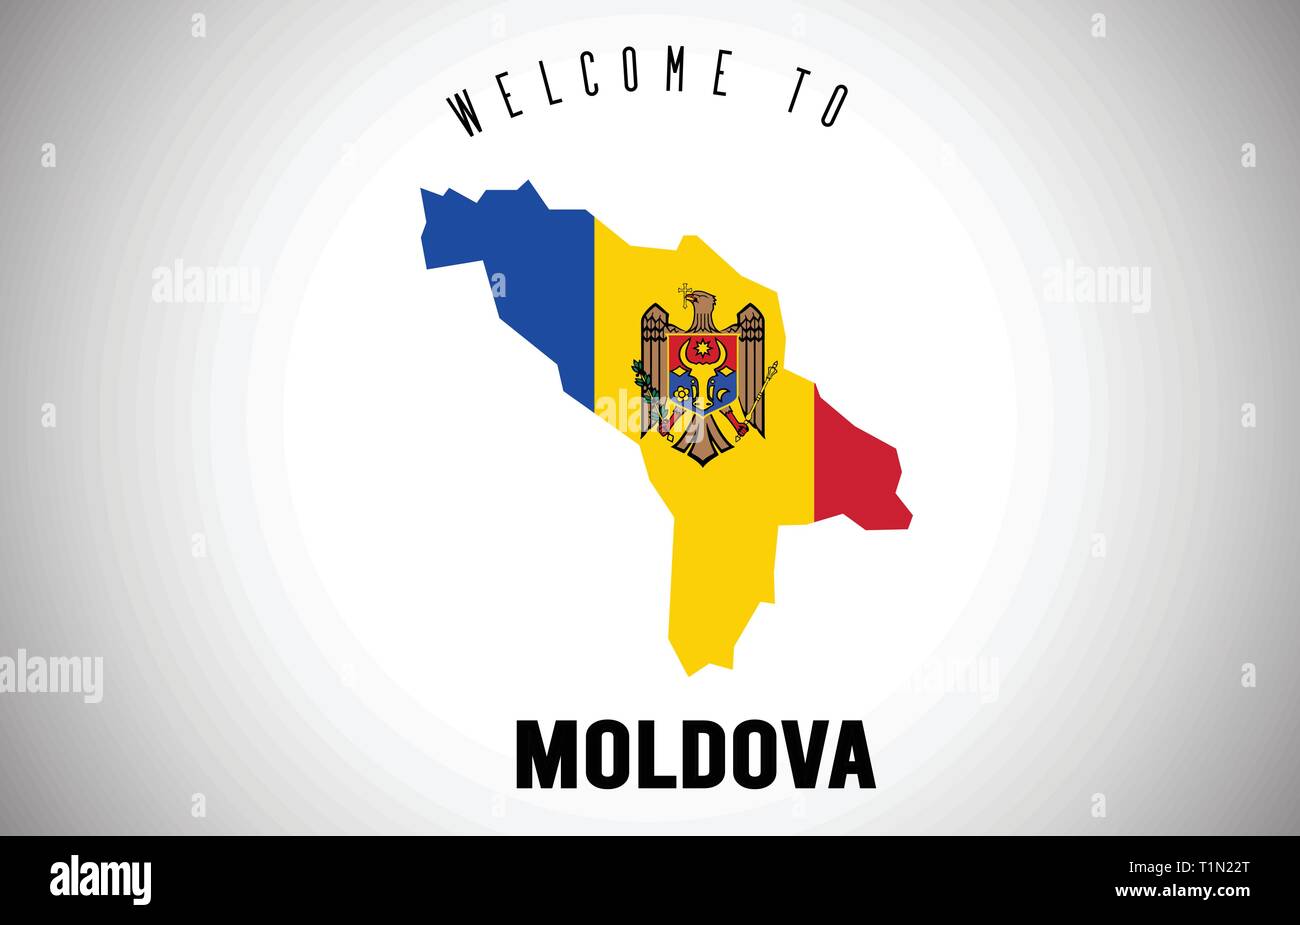 Moldova Welcome to Text and Country flag inside Country Border Map. Uruguay map with national flag Vector Design Illustration. Stock Vector